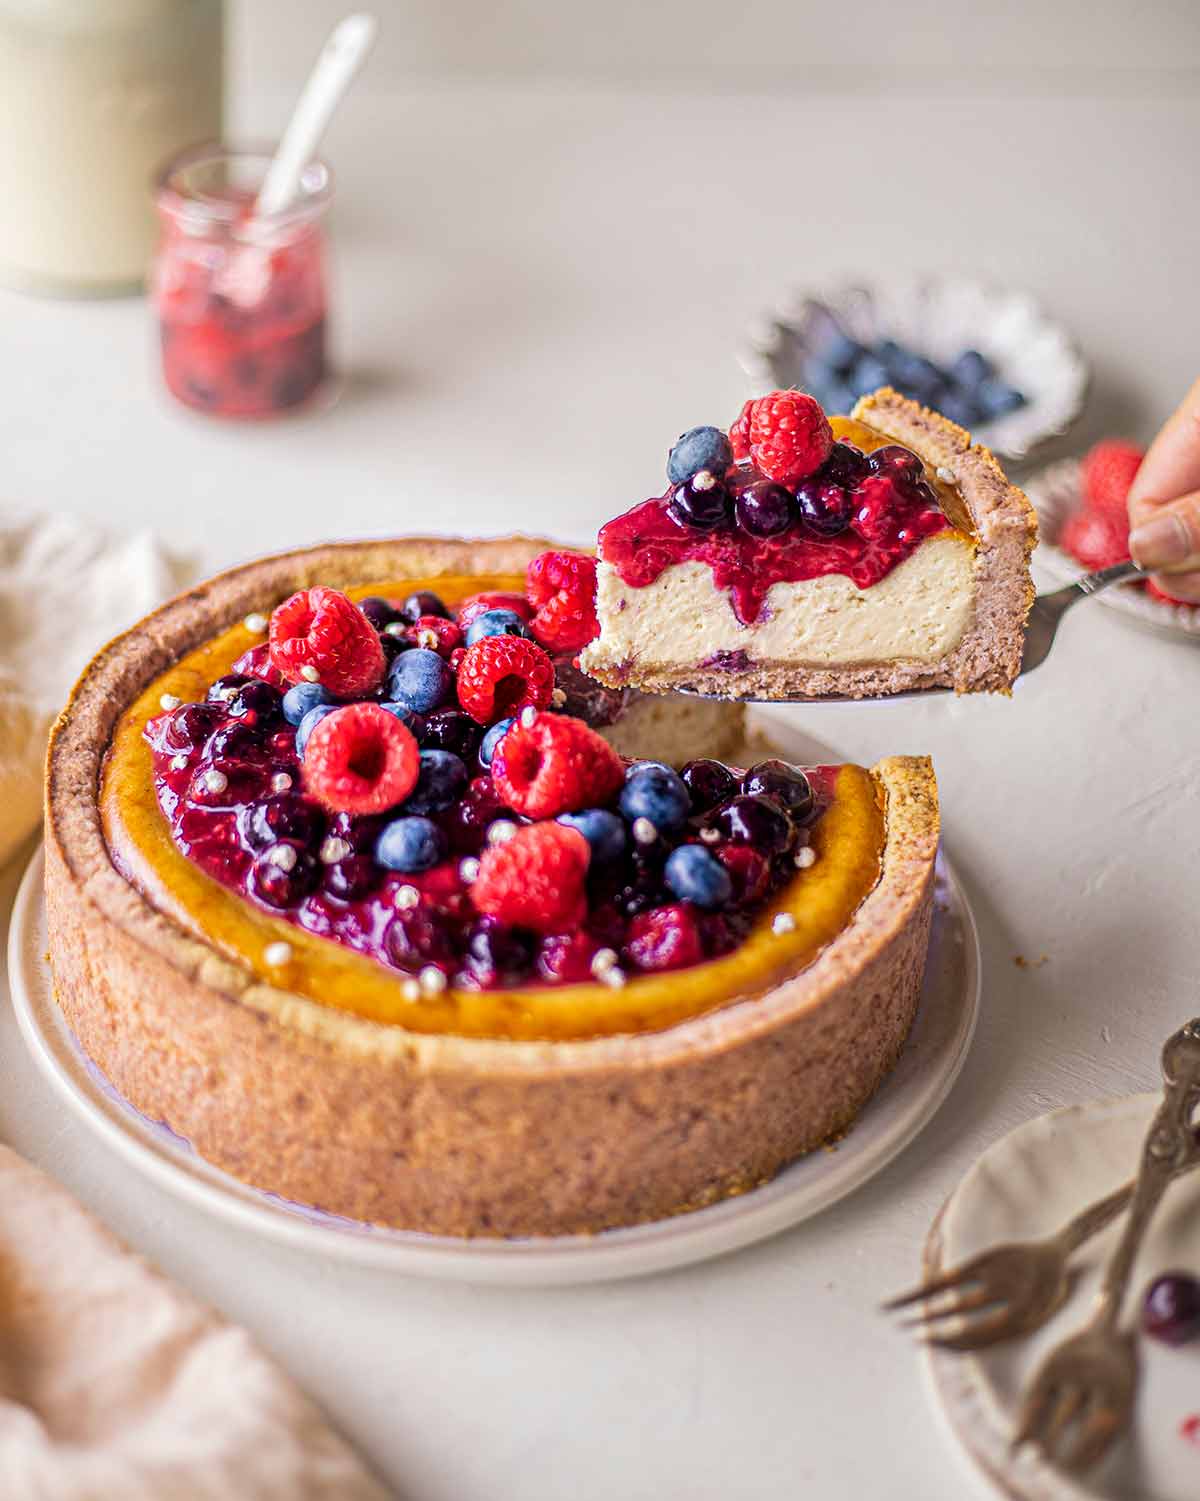 Vegan baked cheesecake topped with berries. A slice has been cut out and is lifted up by cake server to reveal creamy texture of cheesecake.